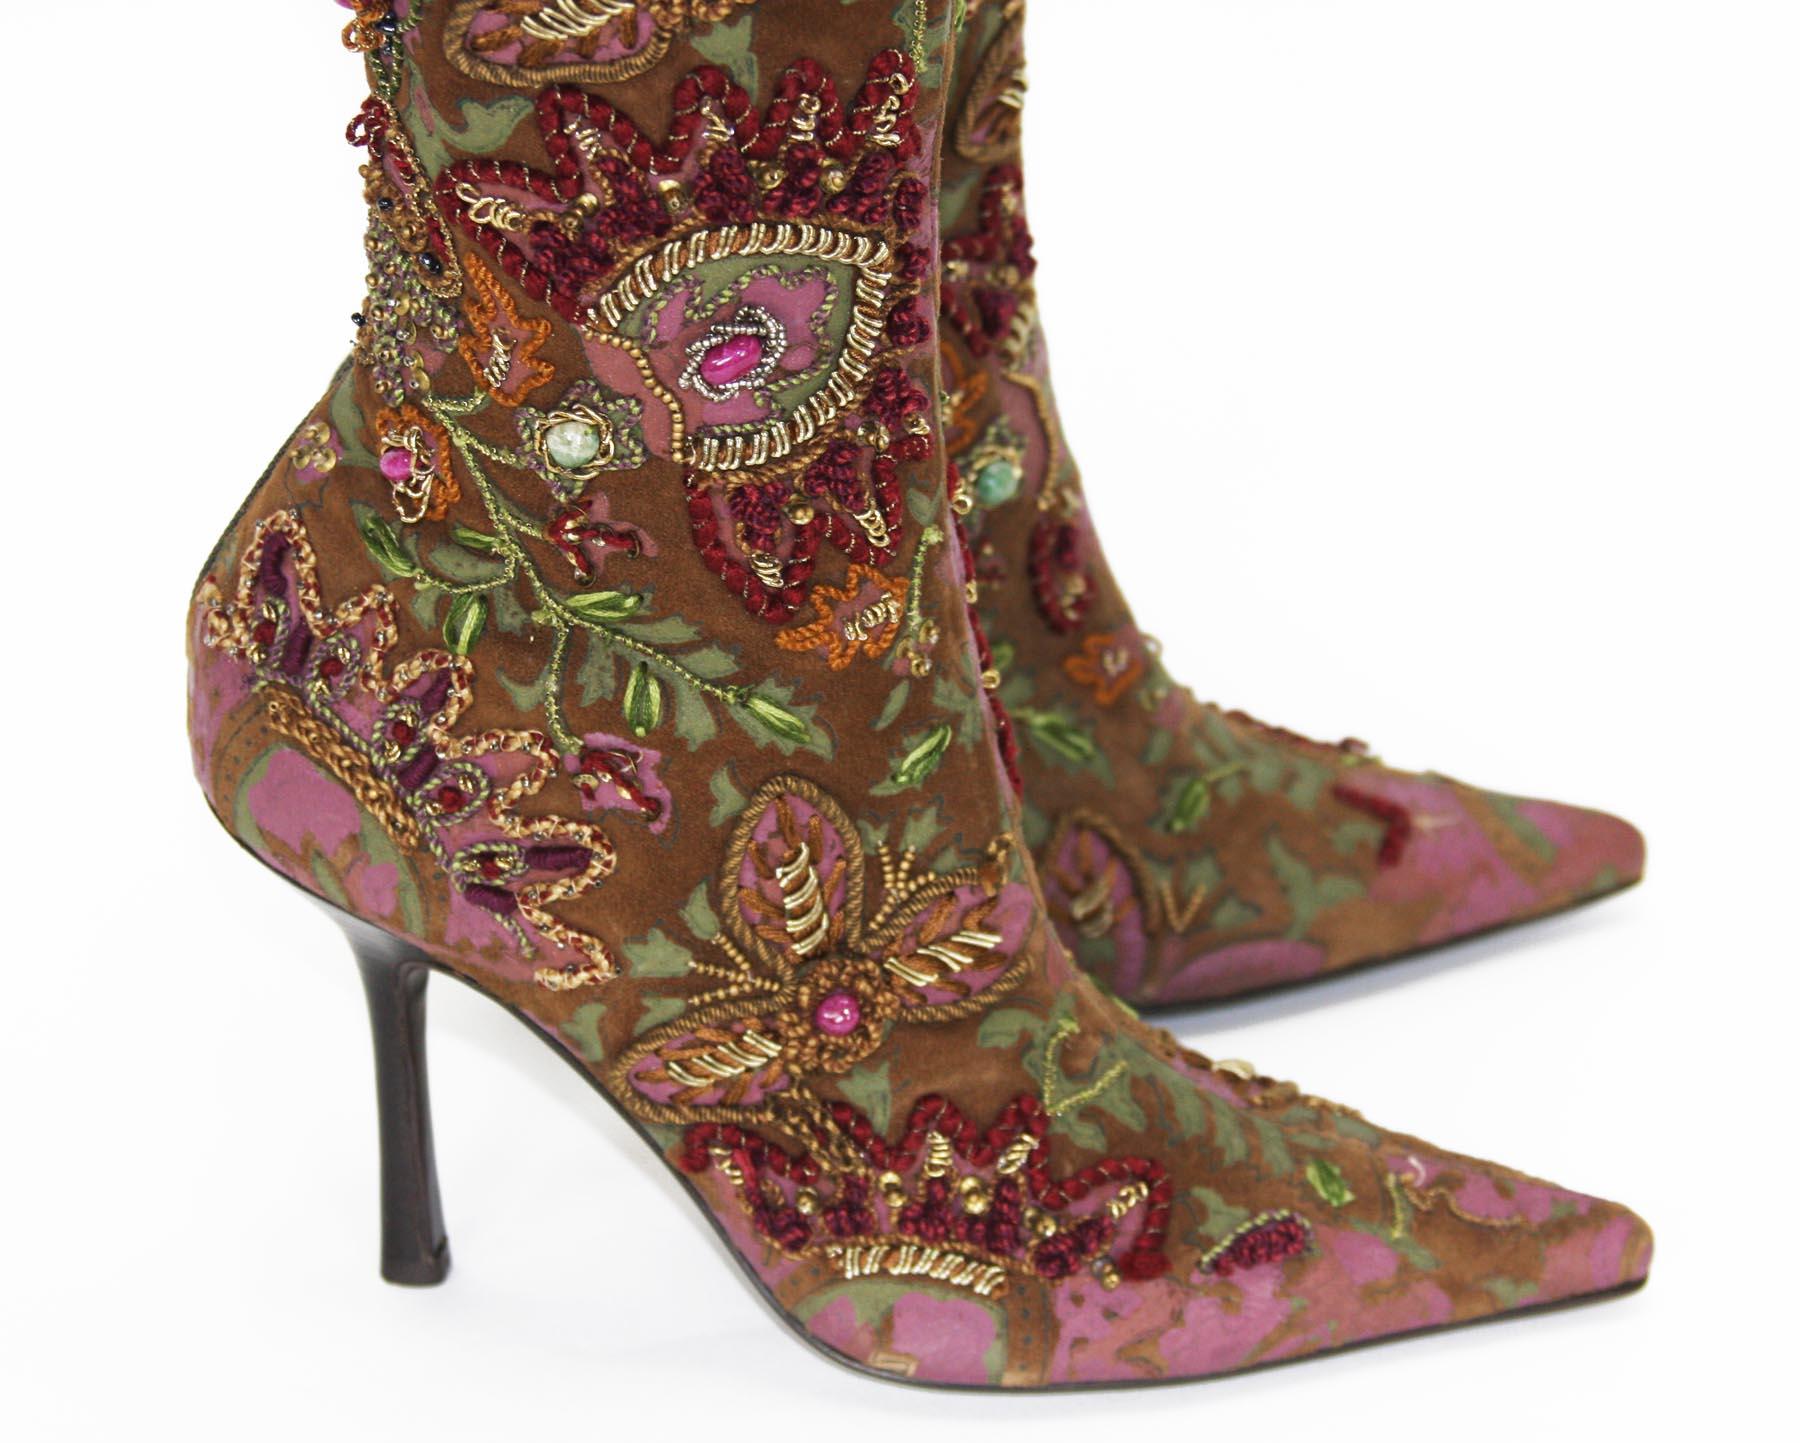 New Oscar De La Renta F/W 2004 Hand Painted Embroidered Boots 36.6 - US ...